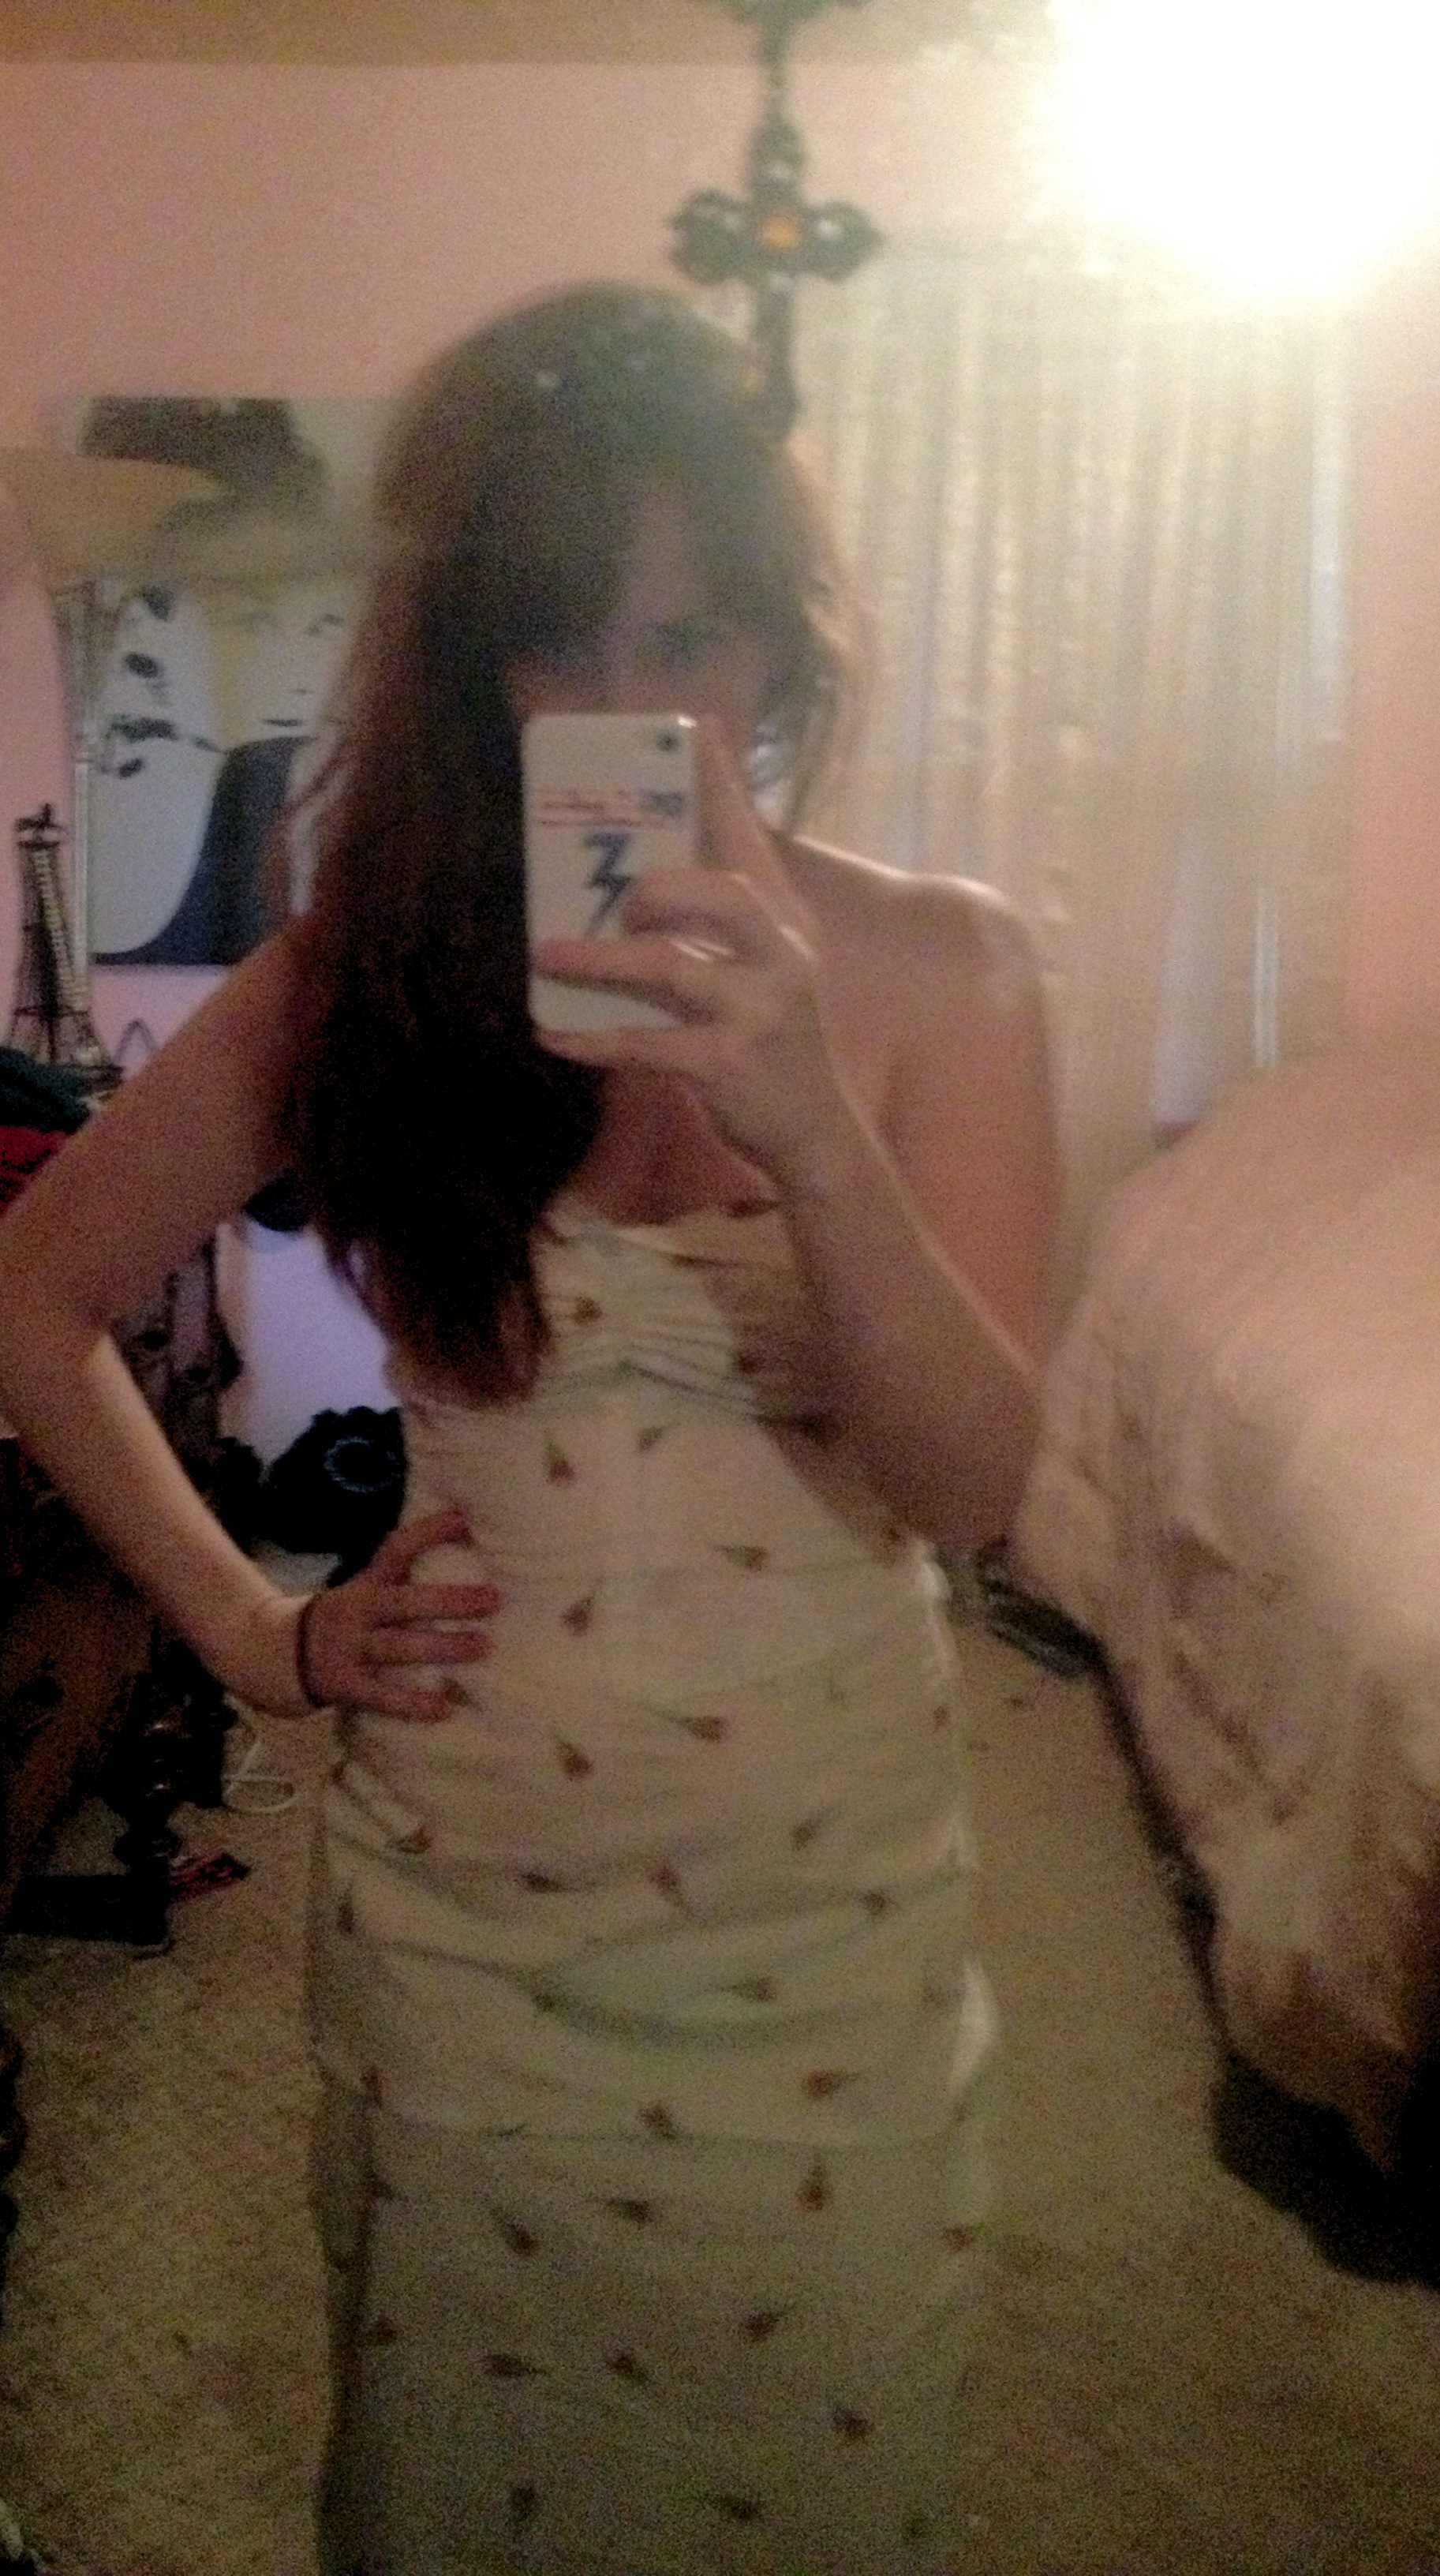 Crappy iphone fitting pics. Gertie's Tiki dress. HELP